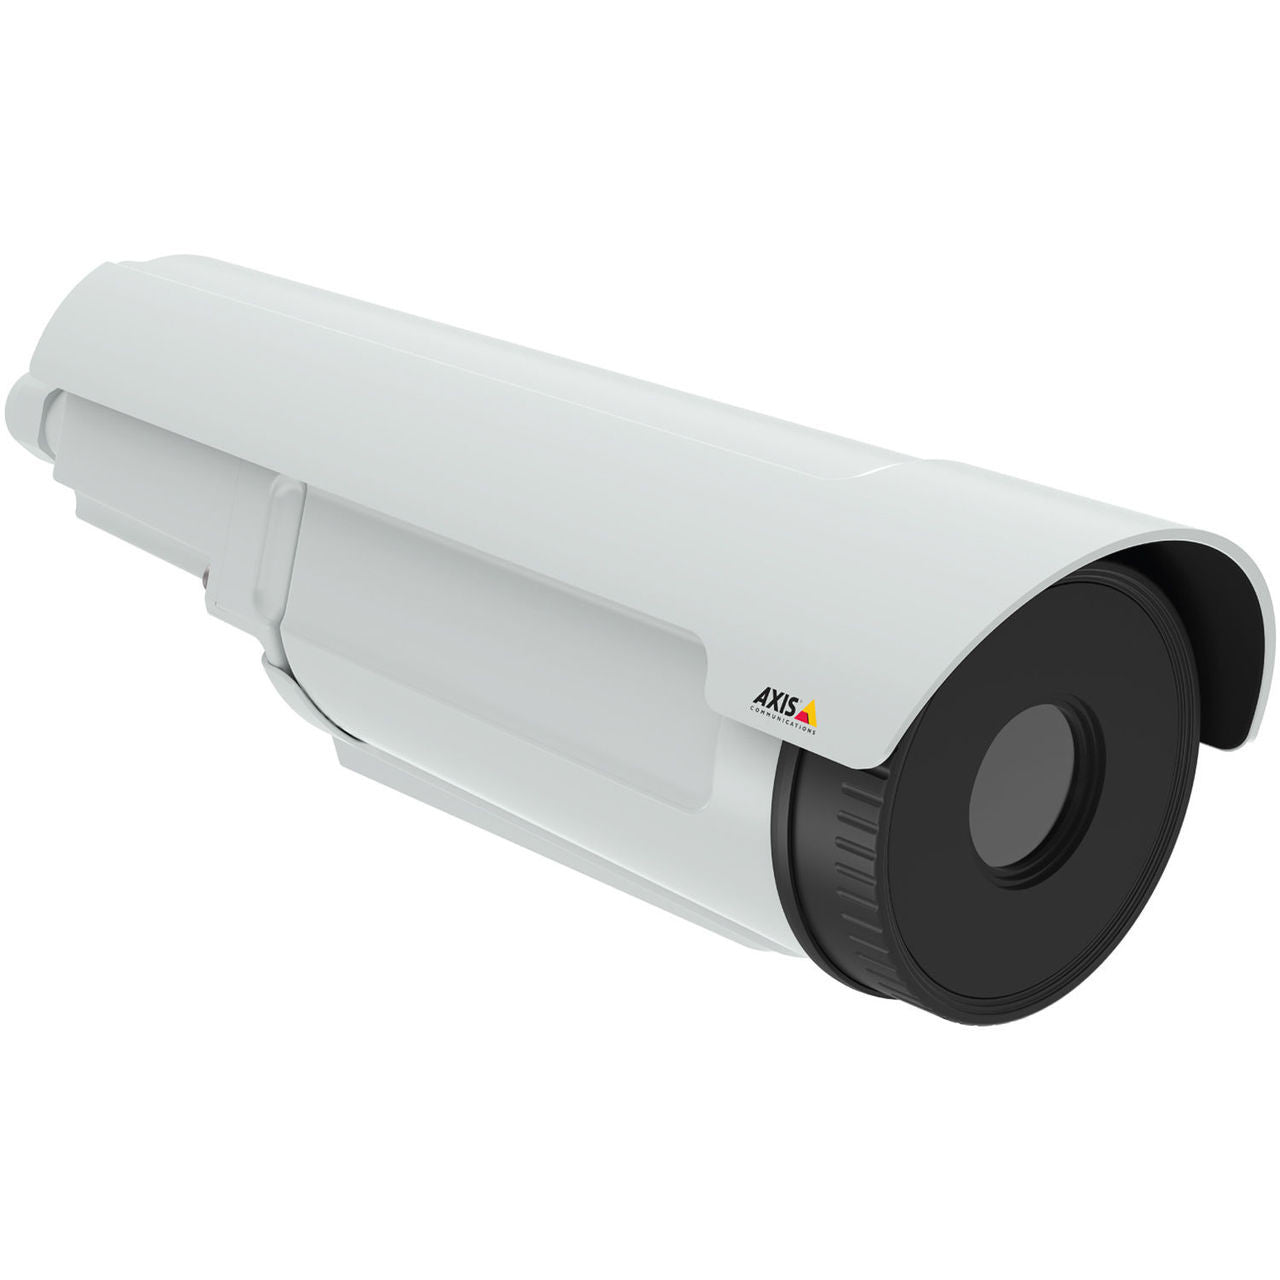 AXIS Q1941-E PT Mount (0979-001) 19mm 30fps Thermal Network Camera